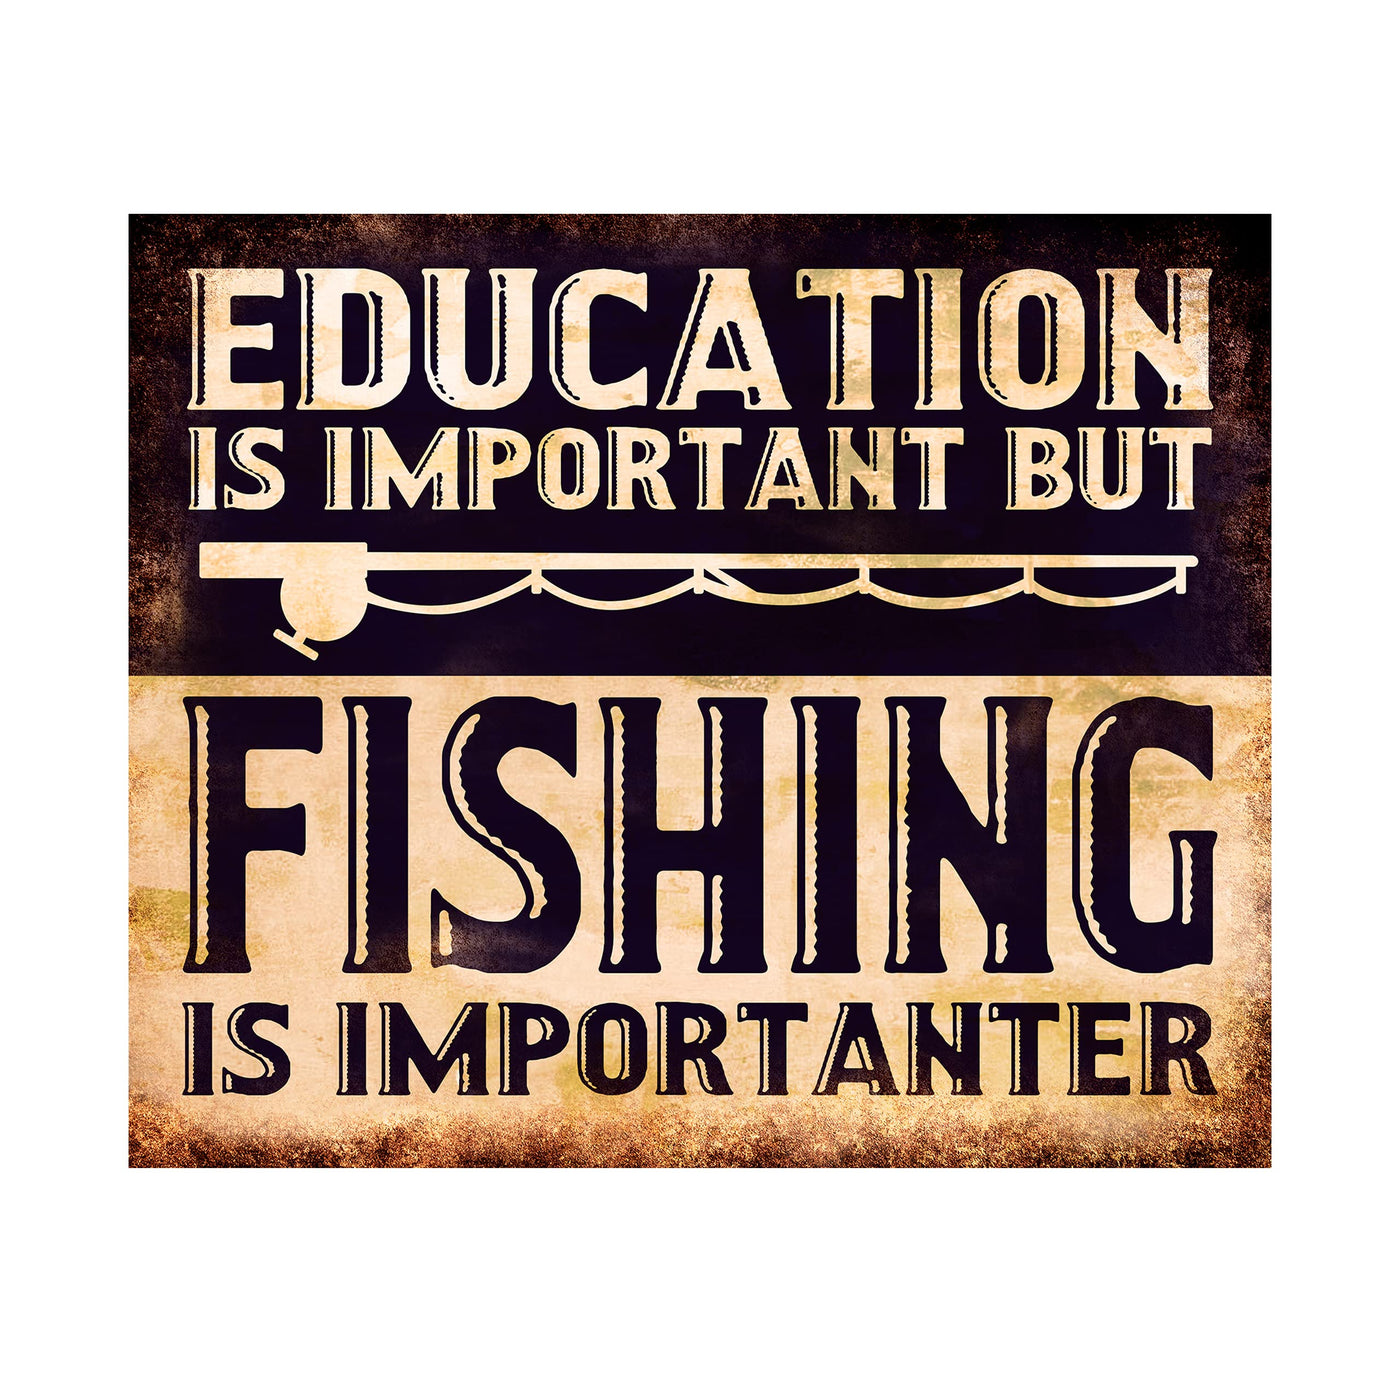 Education Is Important But Fishing Is Importanter-Funny Wall Sign -10 x 8" Rustic Wall Art Print w/Fishing Pole Image -Ready to Frame. Home-Cabin-Lodge-Lake House Decor. Printed on Photo Paper.